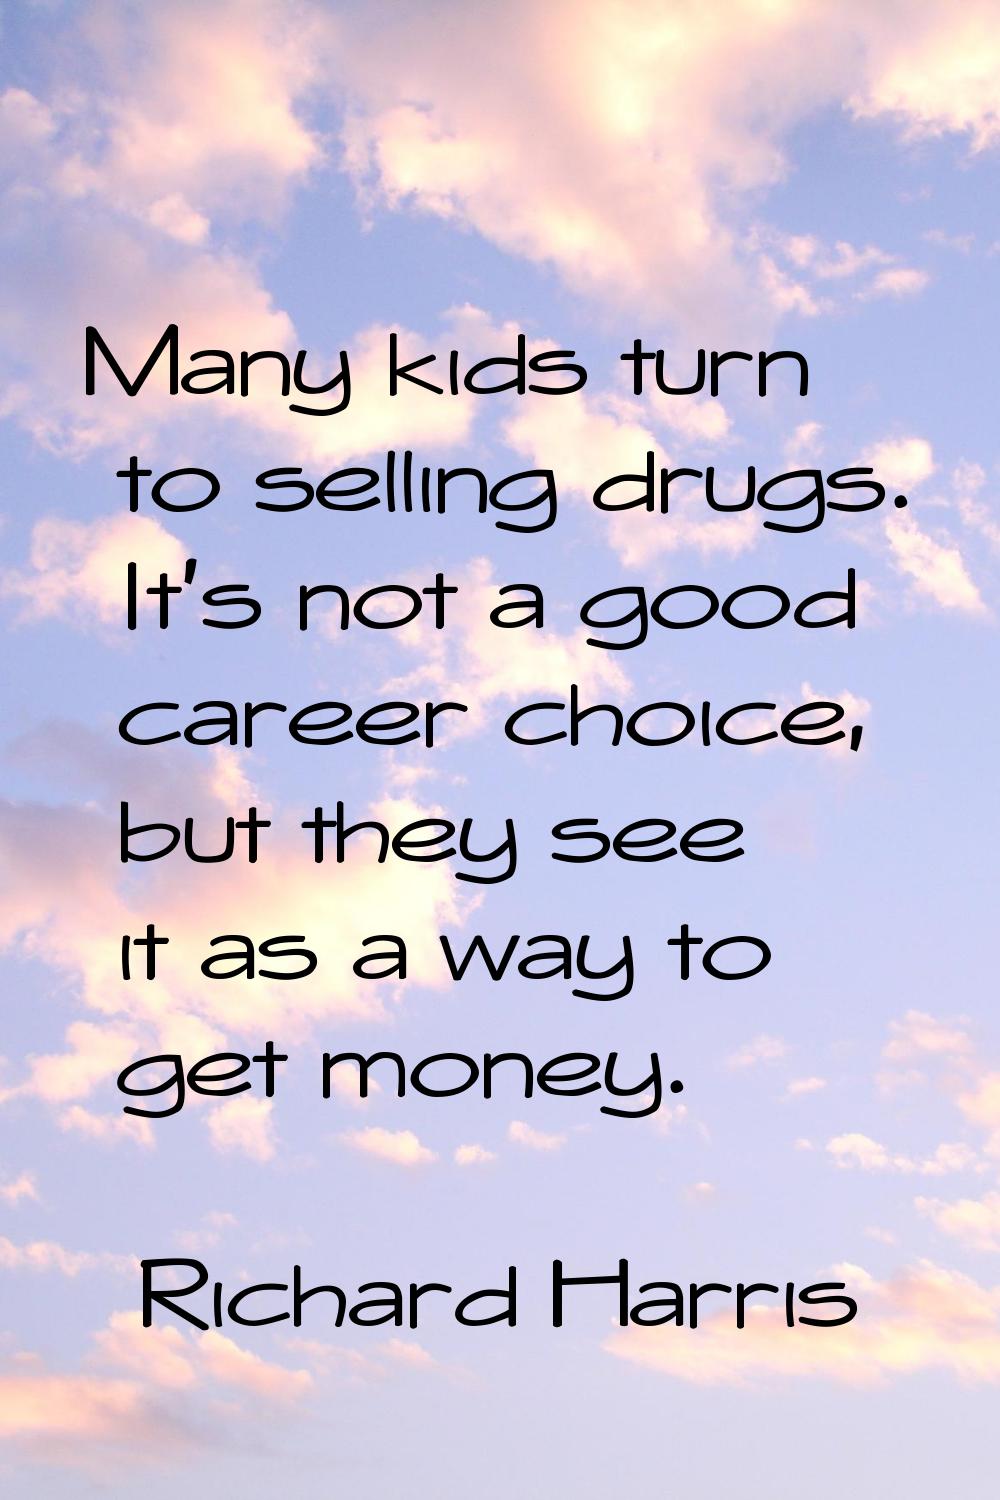 Many kids turn to selling drugs. It's not a good career choice, but they see it as a way to get mon